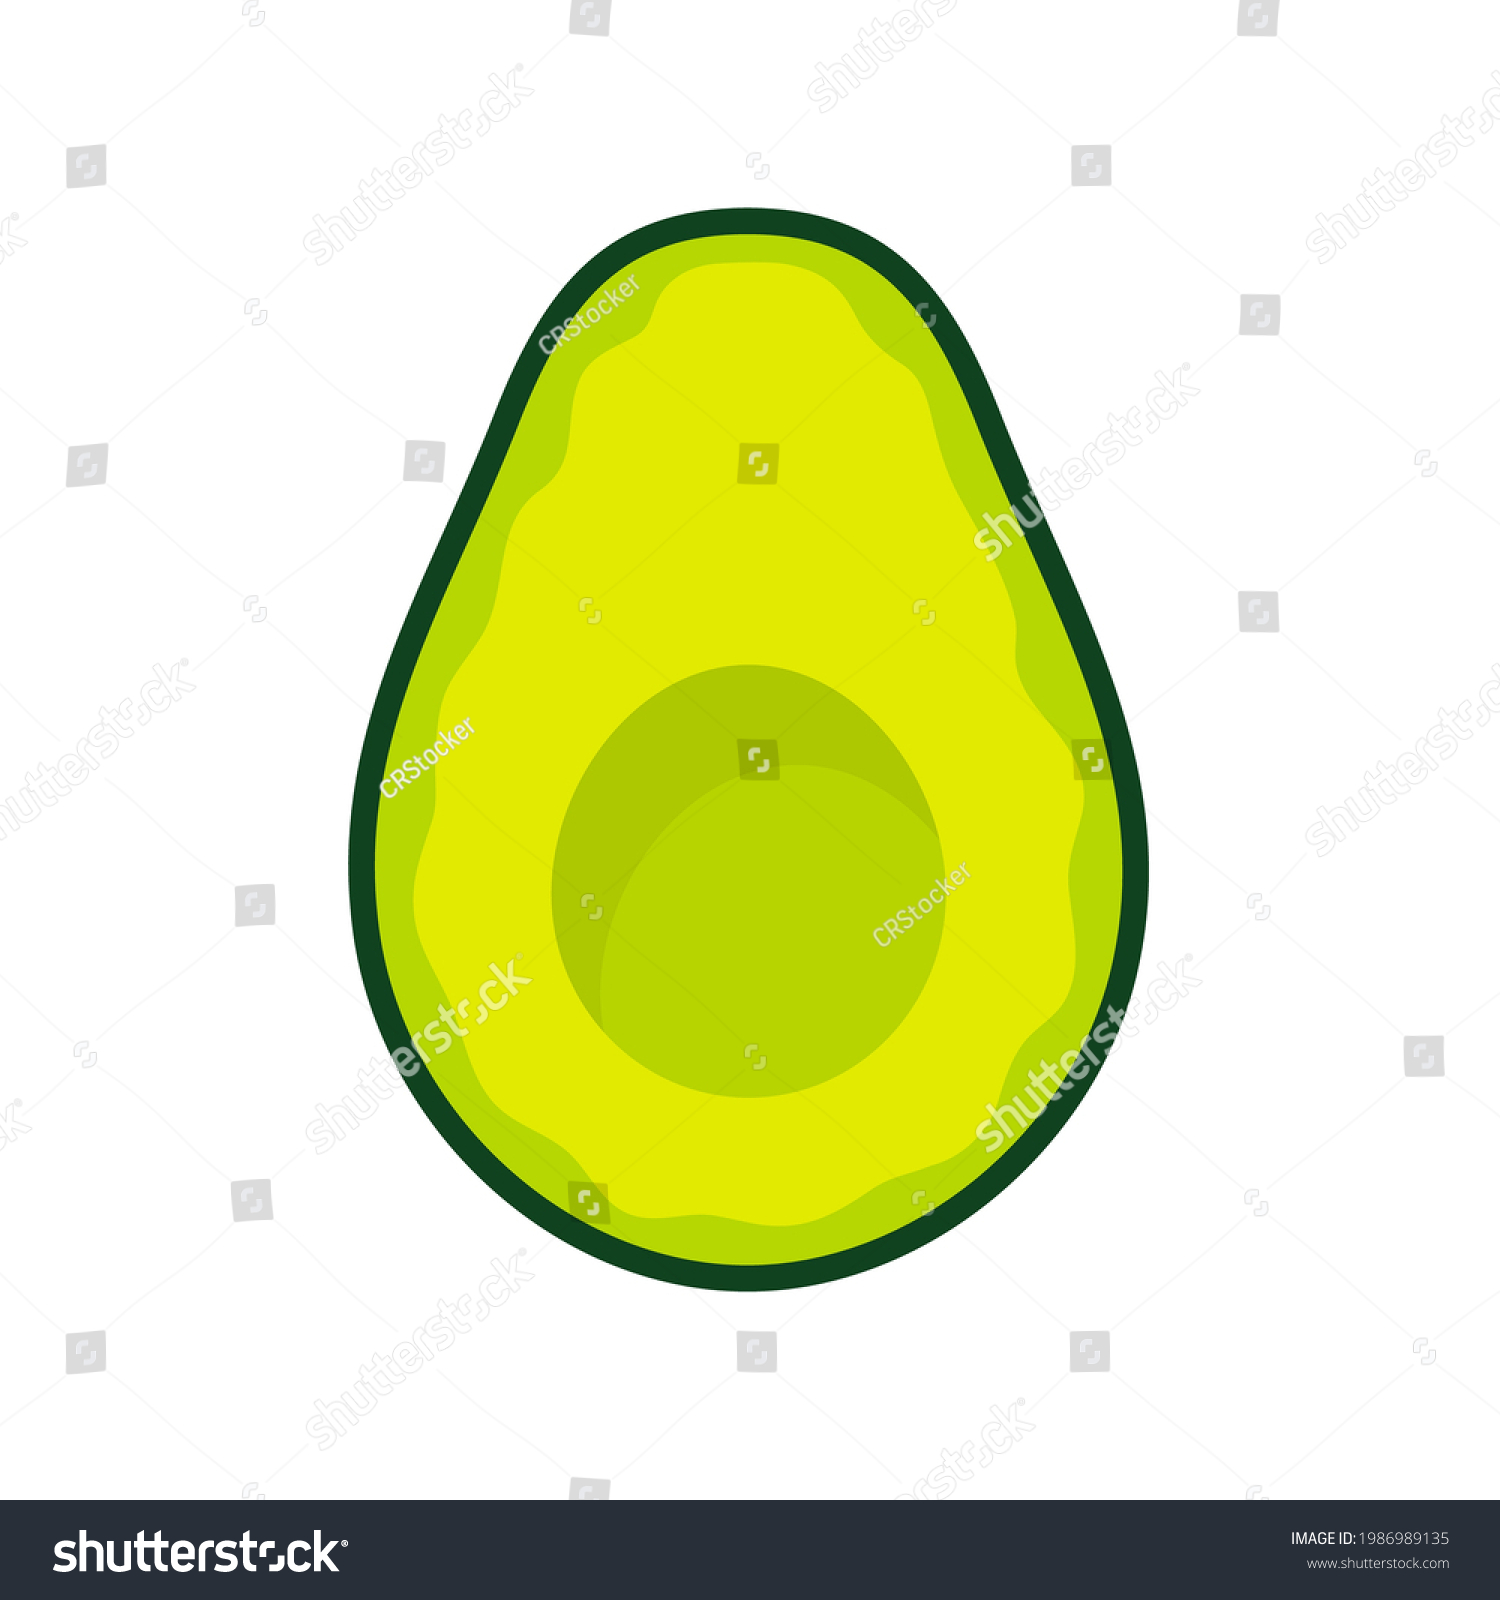 SVG of Avocado vector. avocado fruit cut into pieces There is a round seed inside. for health care svg